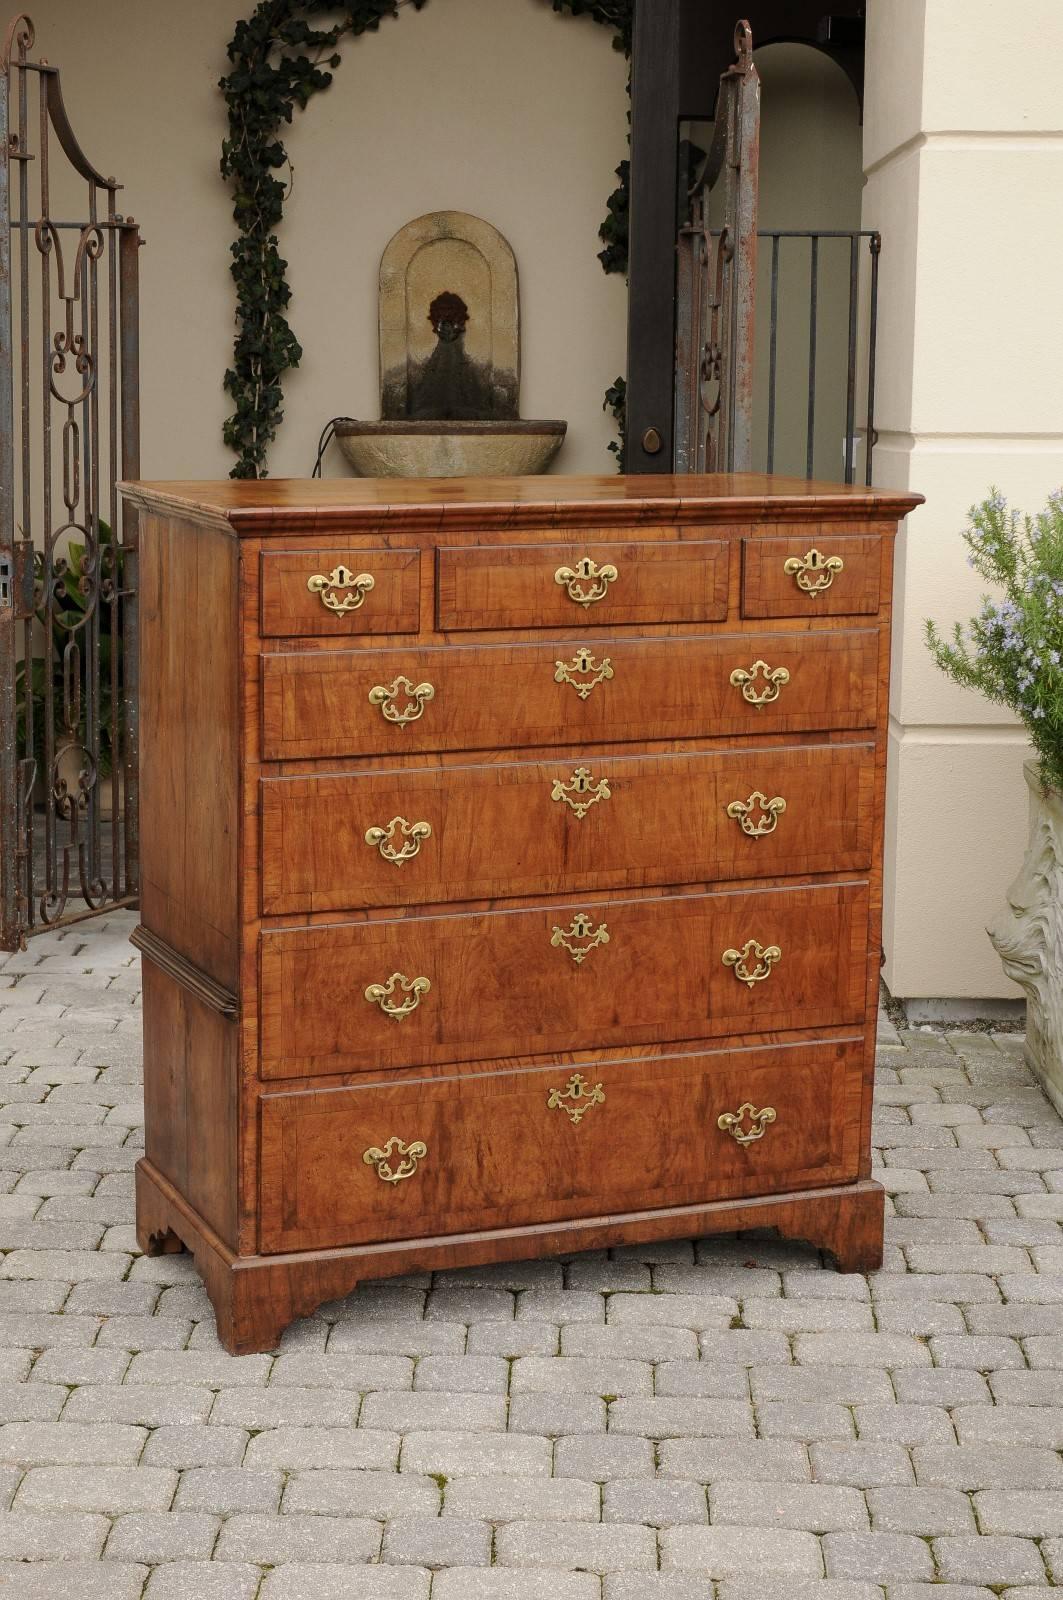 An English walnut seven-drawer chest from the early 19th century. This English chest of drawers features an exquisite two-toned rectangular butterfly veneered top over seven graduated drawers. Four full width drawers sit below three smaller drawers